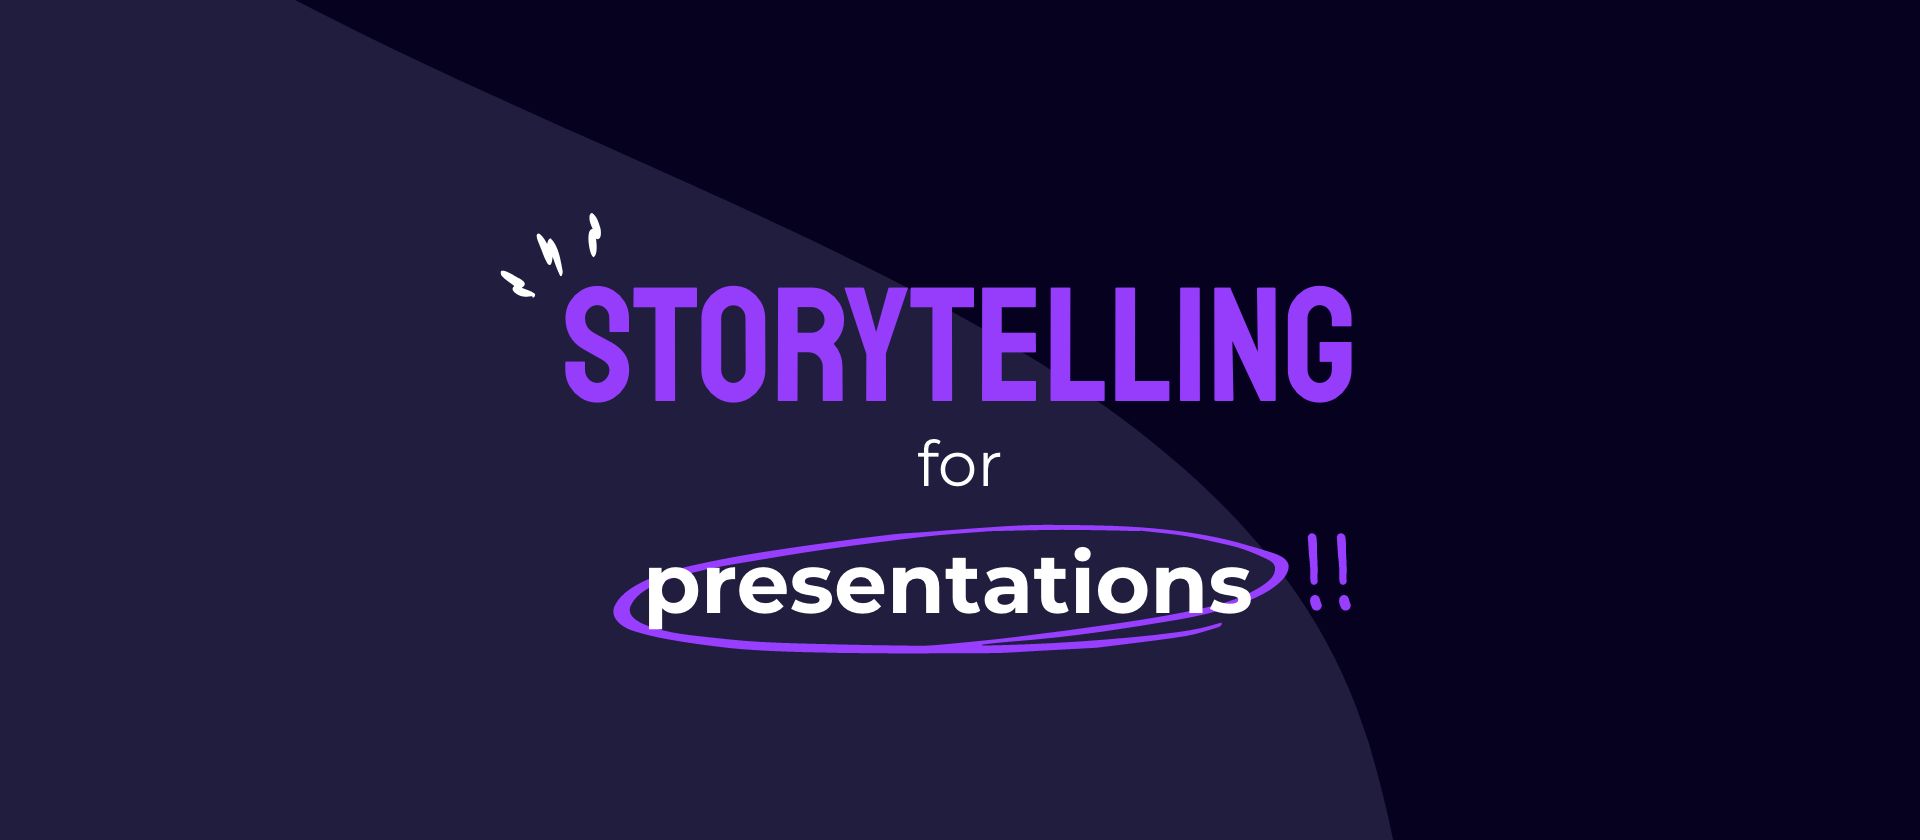 Storytelling in presentations: harness the Hero’s Journey to achieve success.